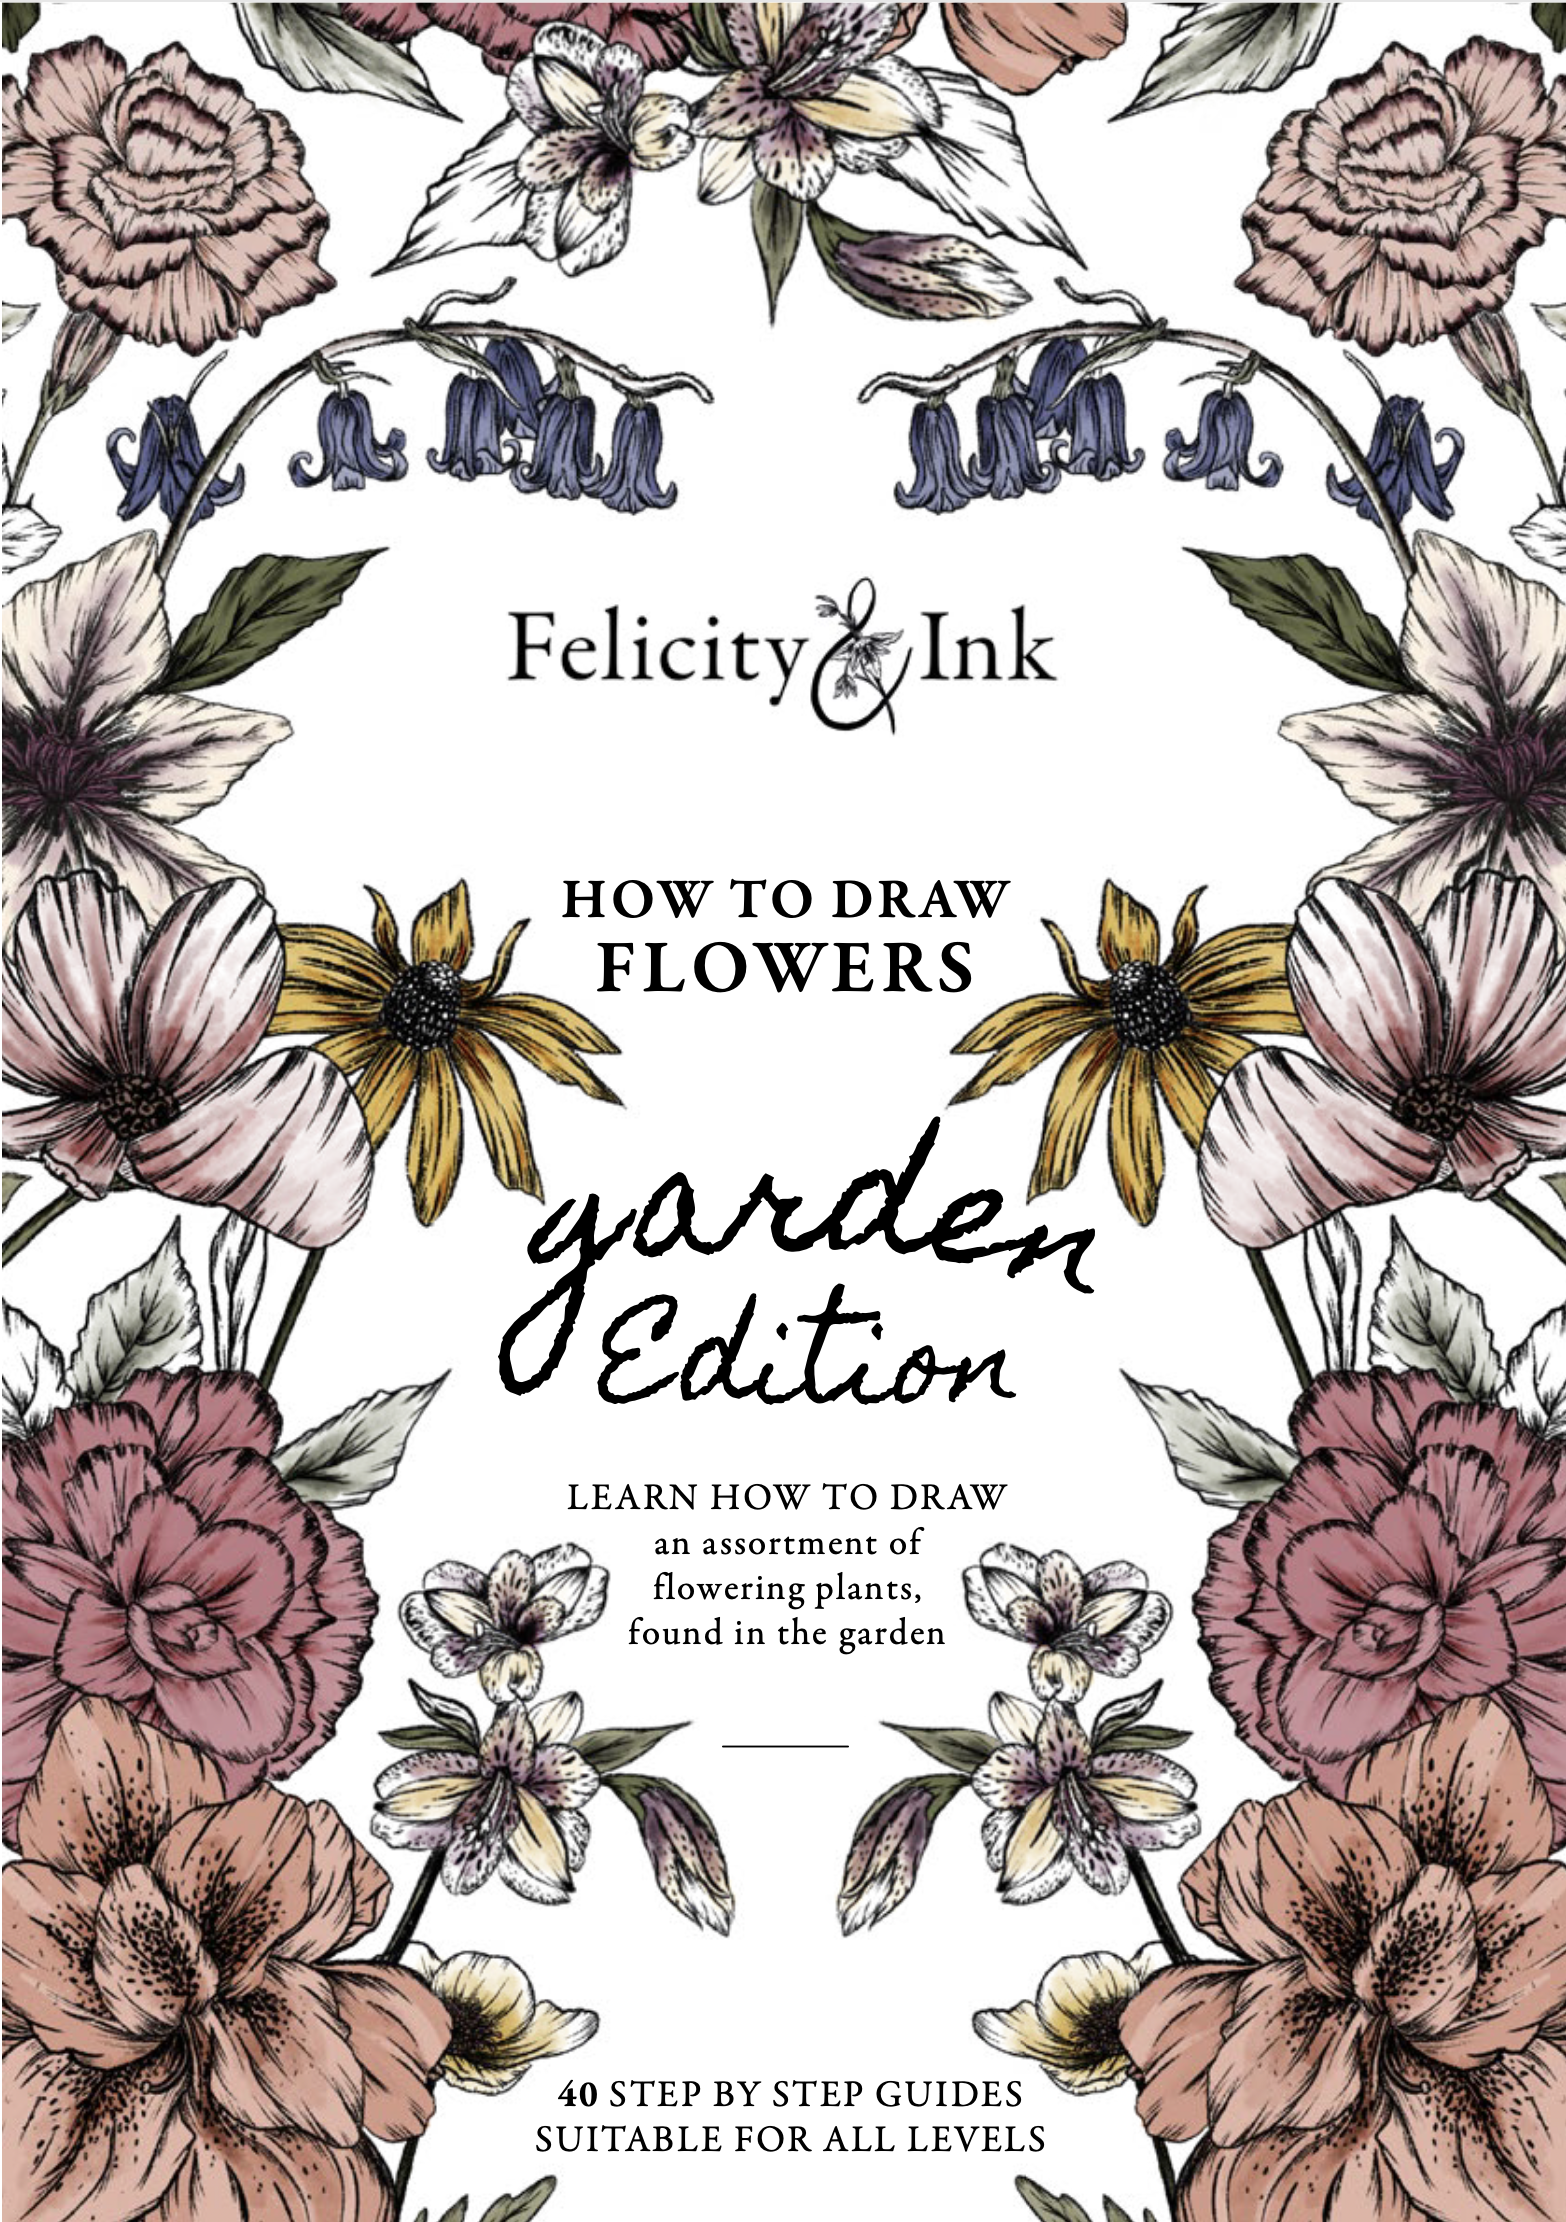 How To Draw Flowers - Garden Edition